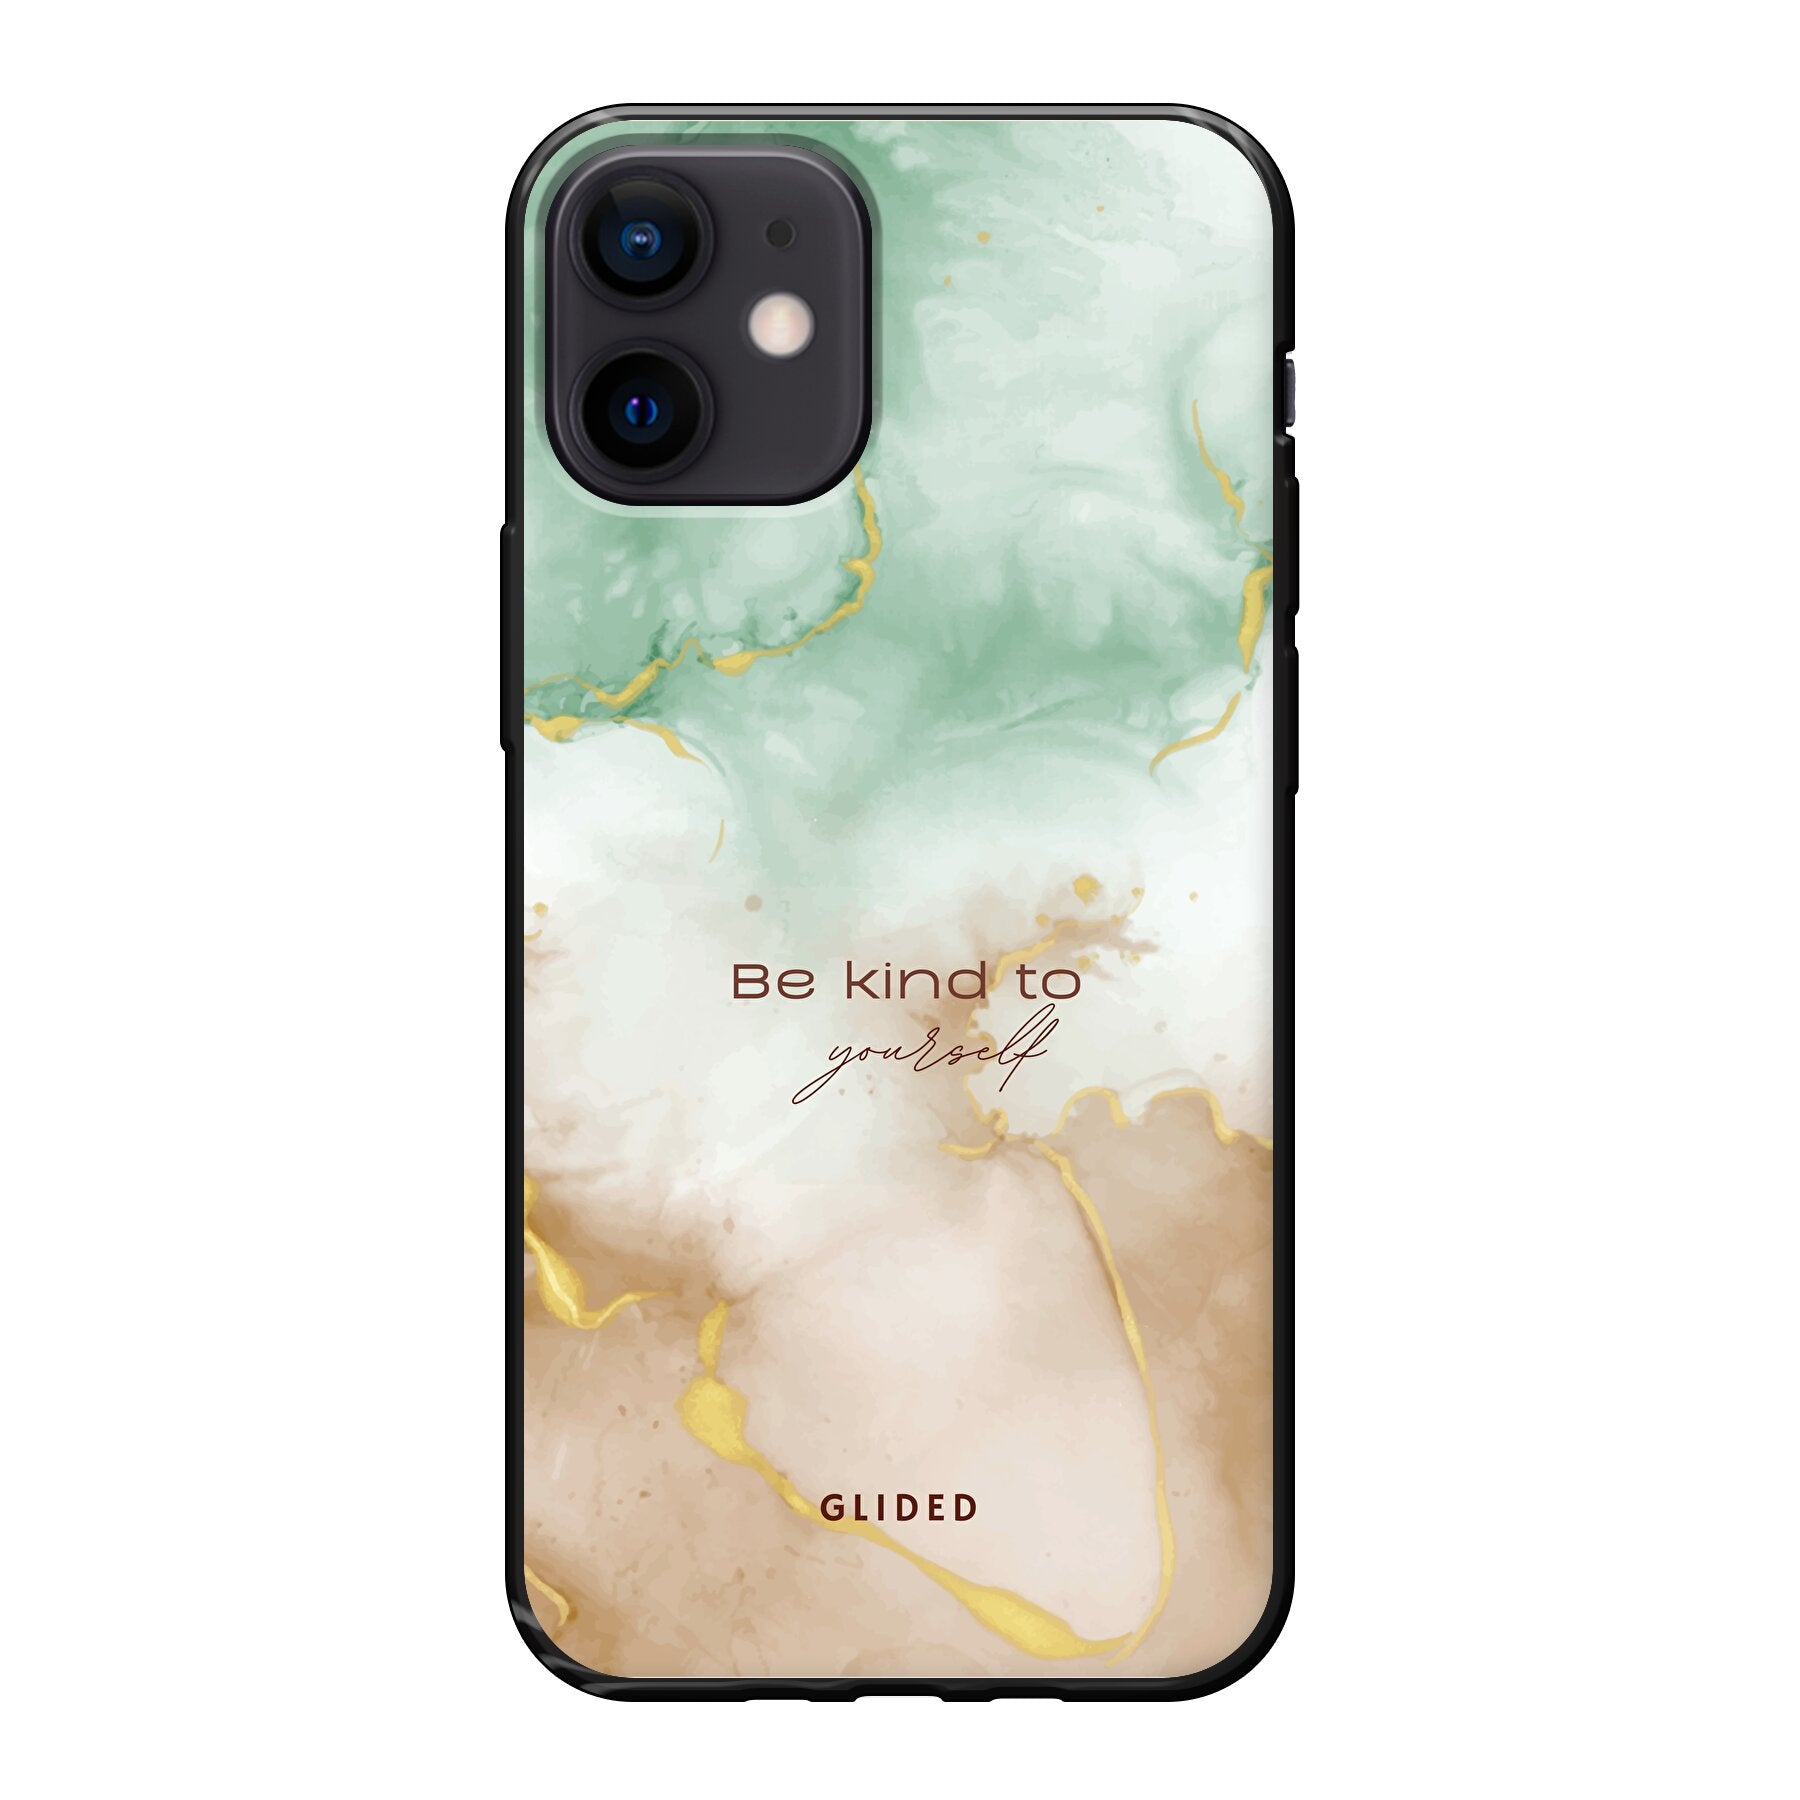 Kind to yourself - iPhone 12 mini Handyhülle Soft case